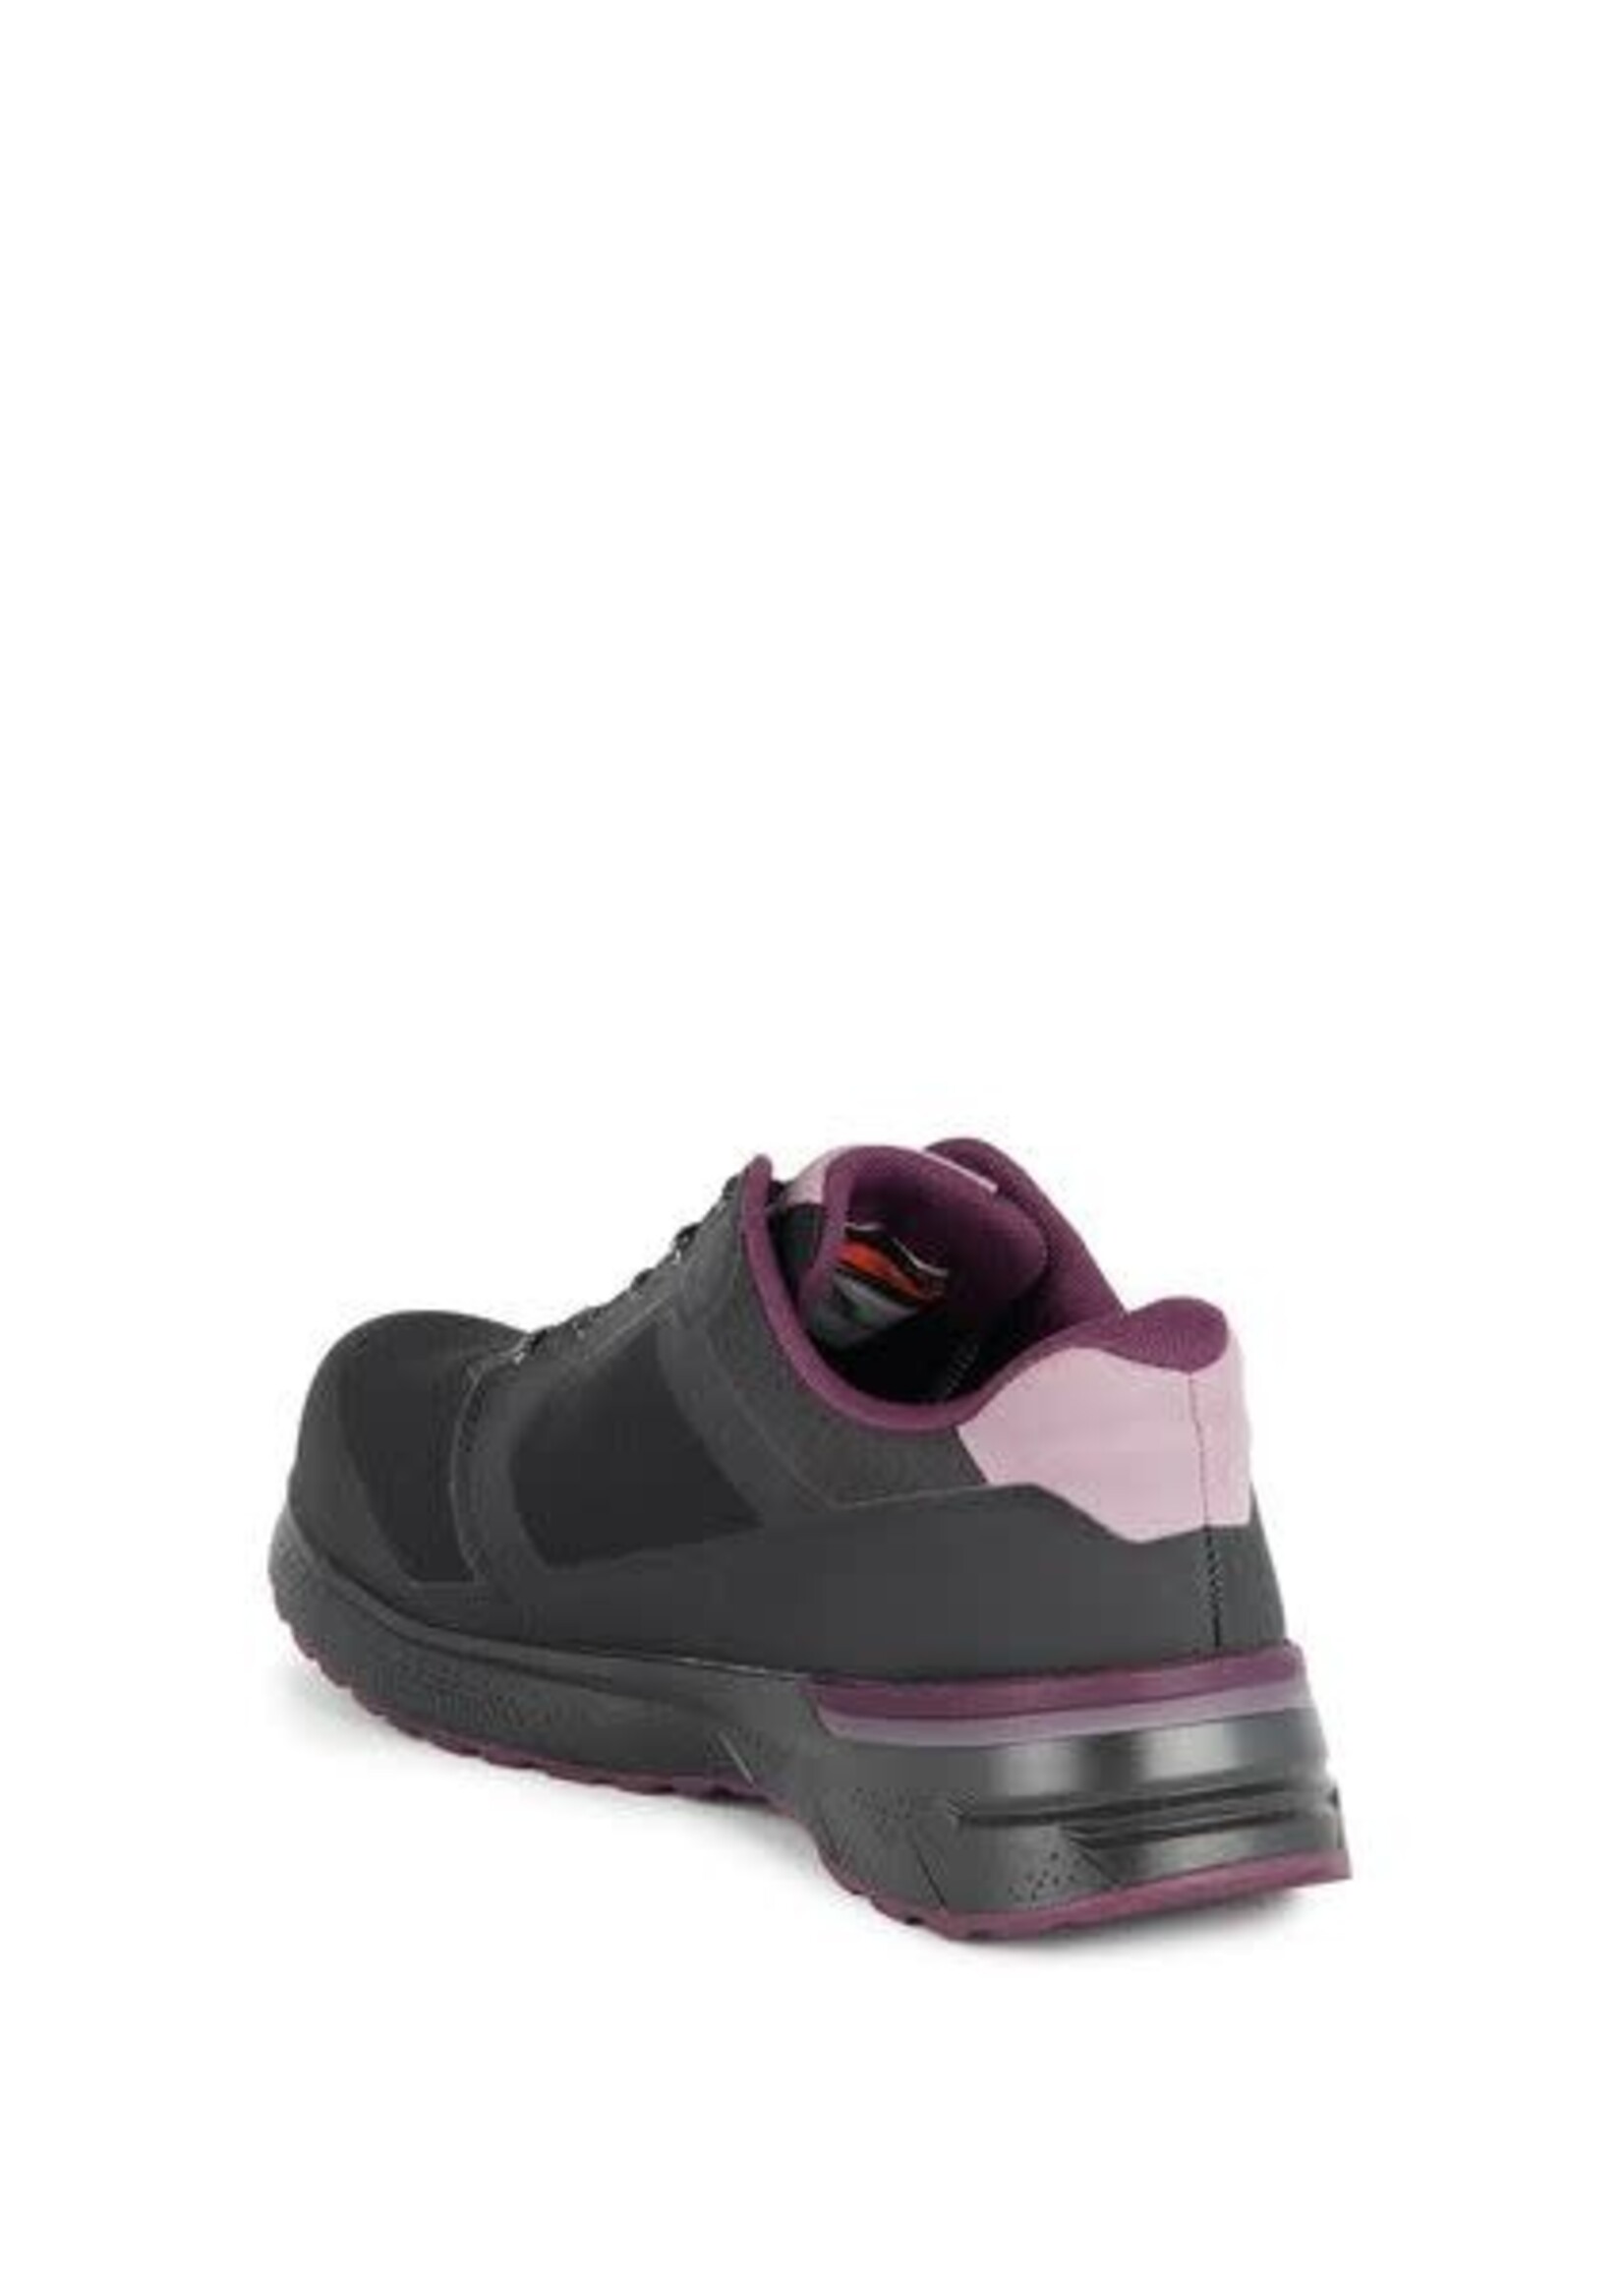 Womens Safety LadyFit, Black – STC Women's Ultra Lightweight Athletic Work  Shoes S29080 -11 - SHOE PLUS - Low Prices - Express Shipping - 100s of  Items to Choose From!